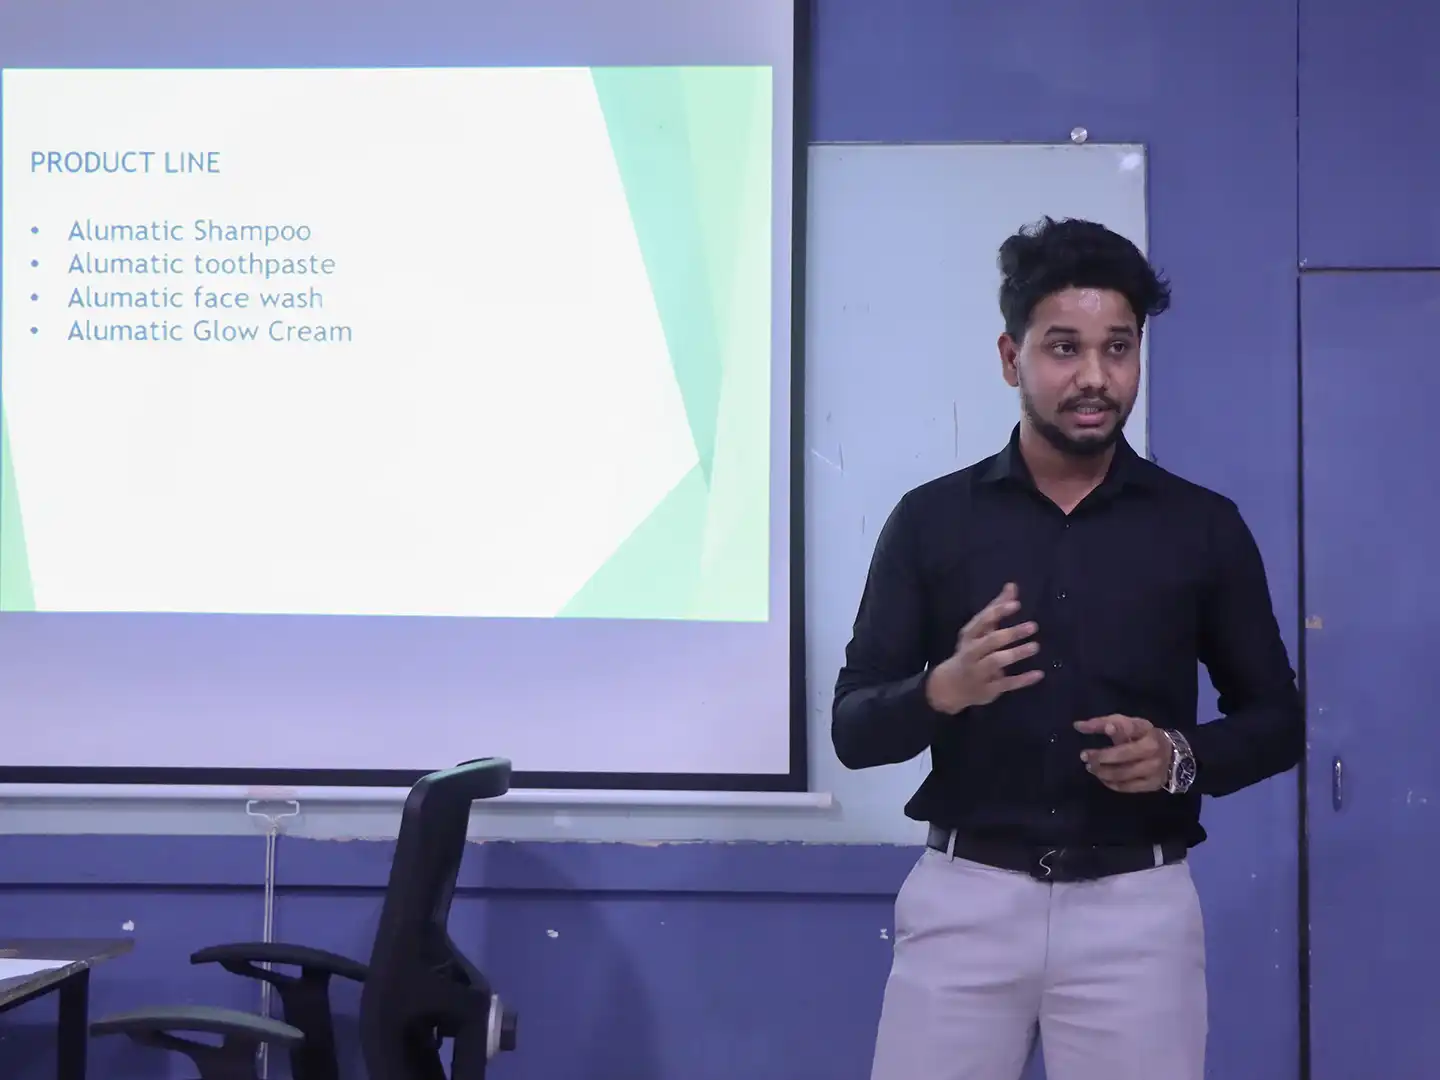 PGDM Students Showcase Innovations at the Shark Tank Event